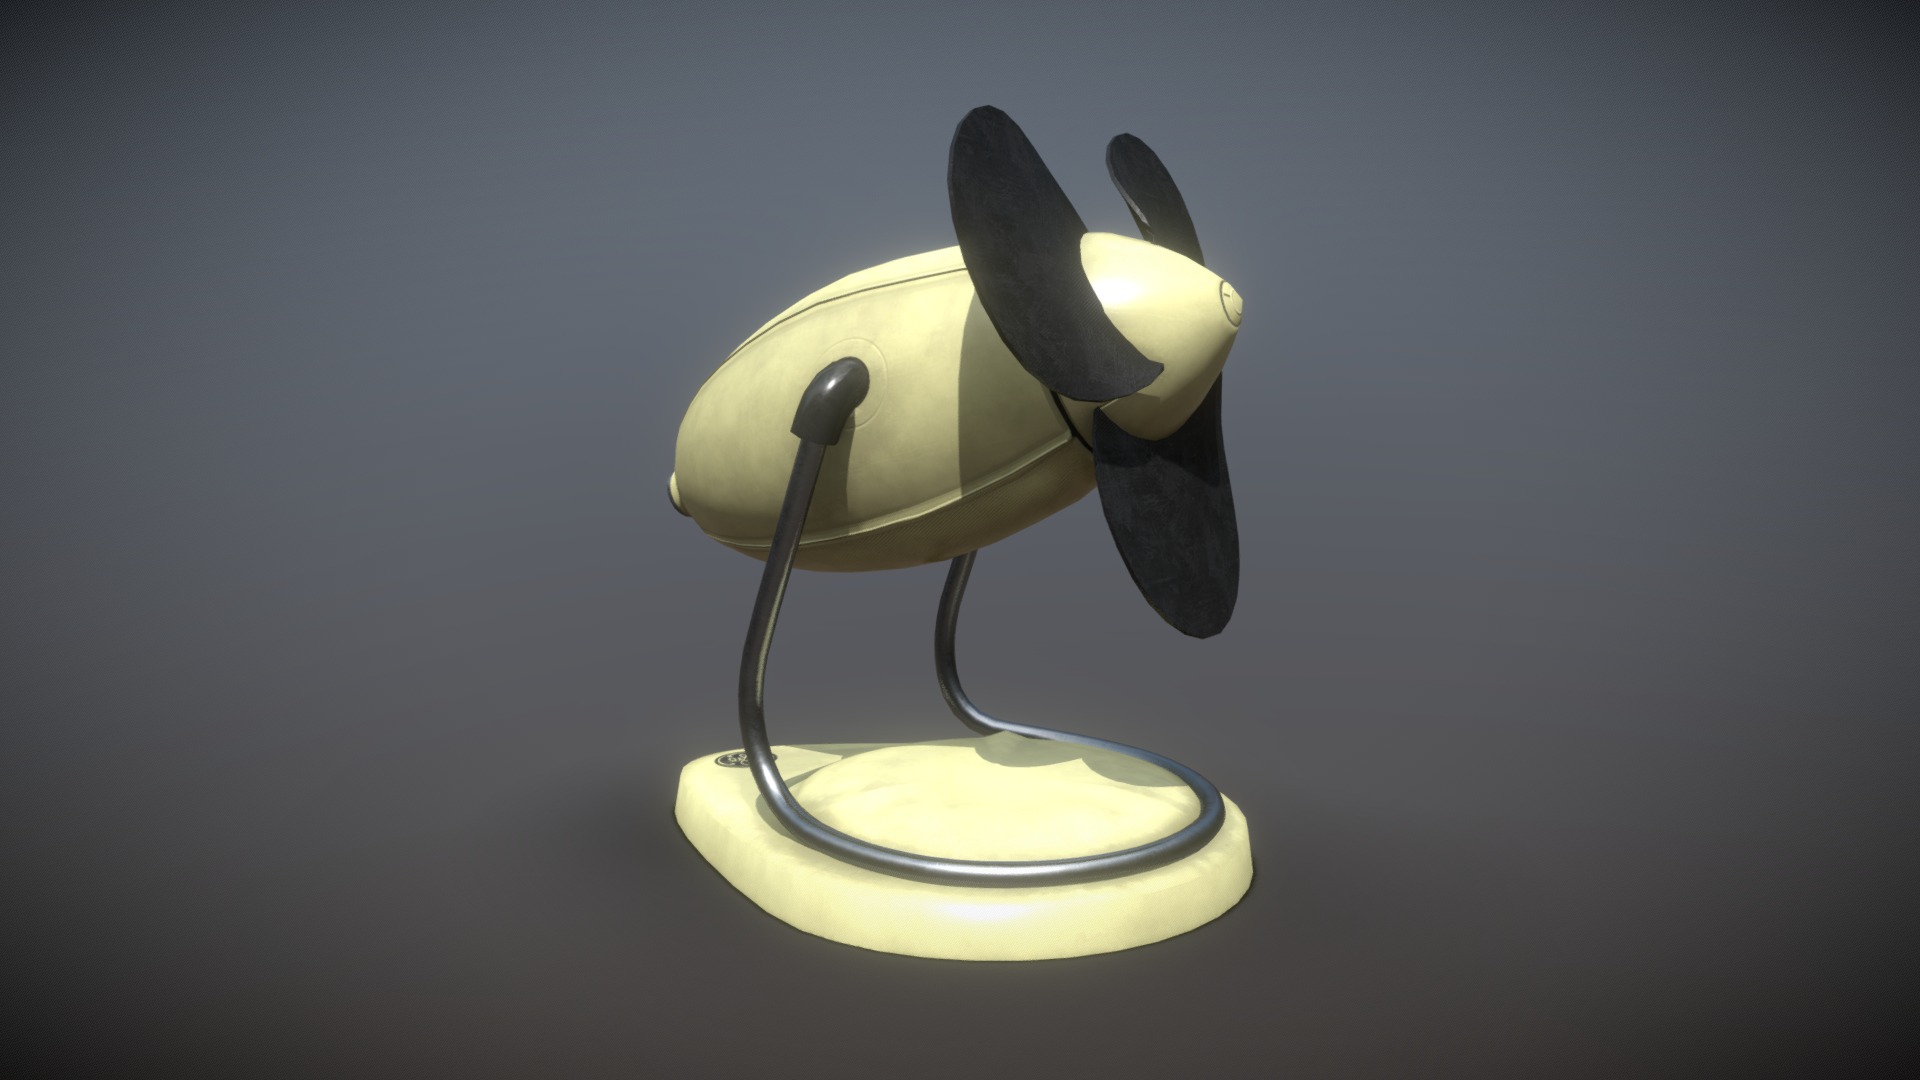 3D model Desktop fan 1 of 10 - This is a 3D model of the Desktop fan 1 of 10. The 3D model is about a light bulb with a black handle.